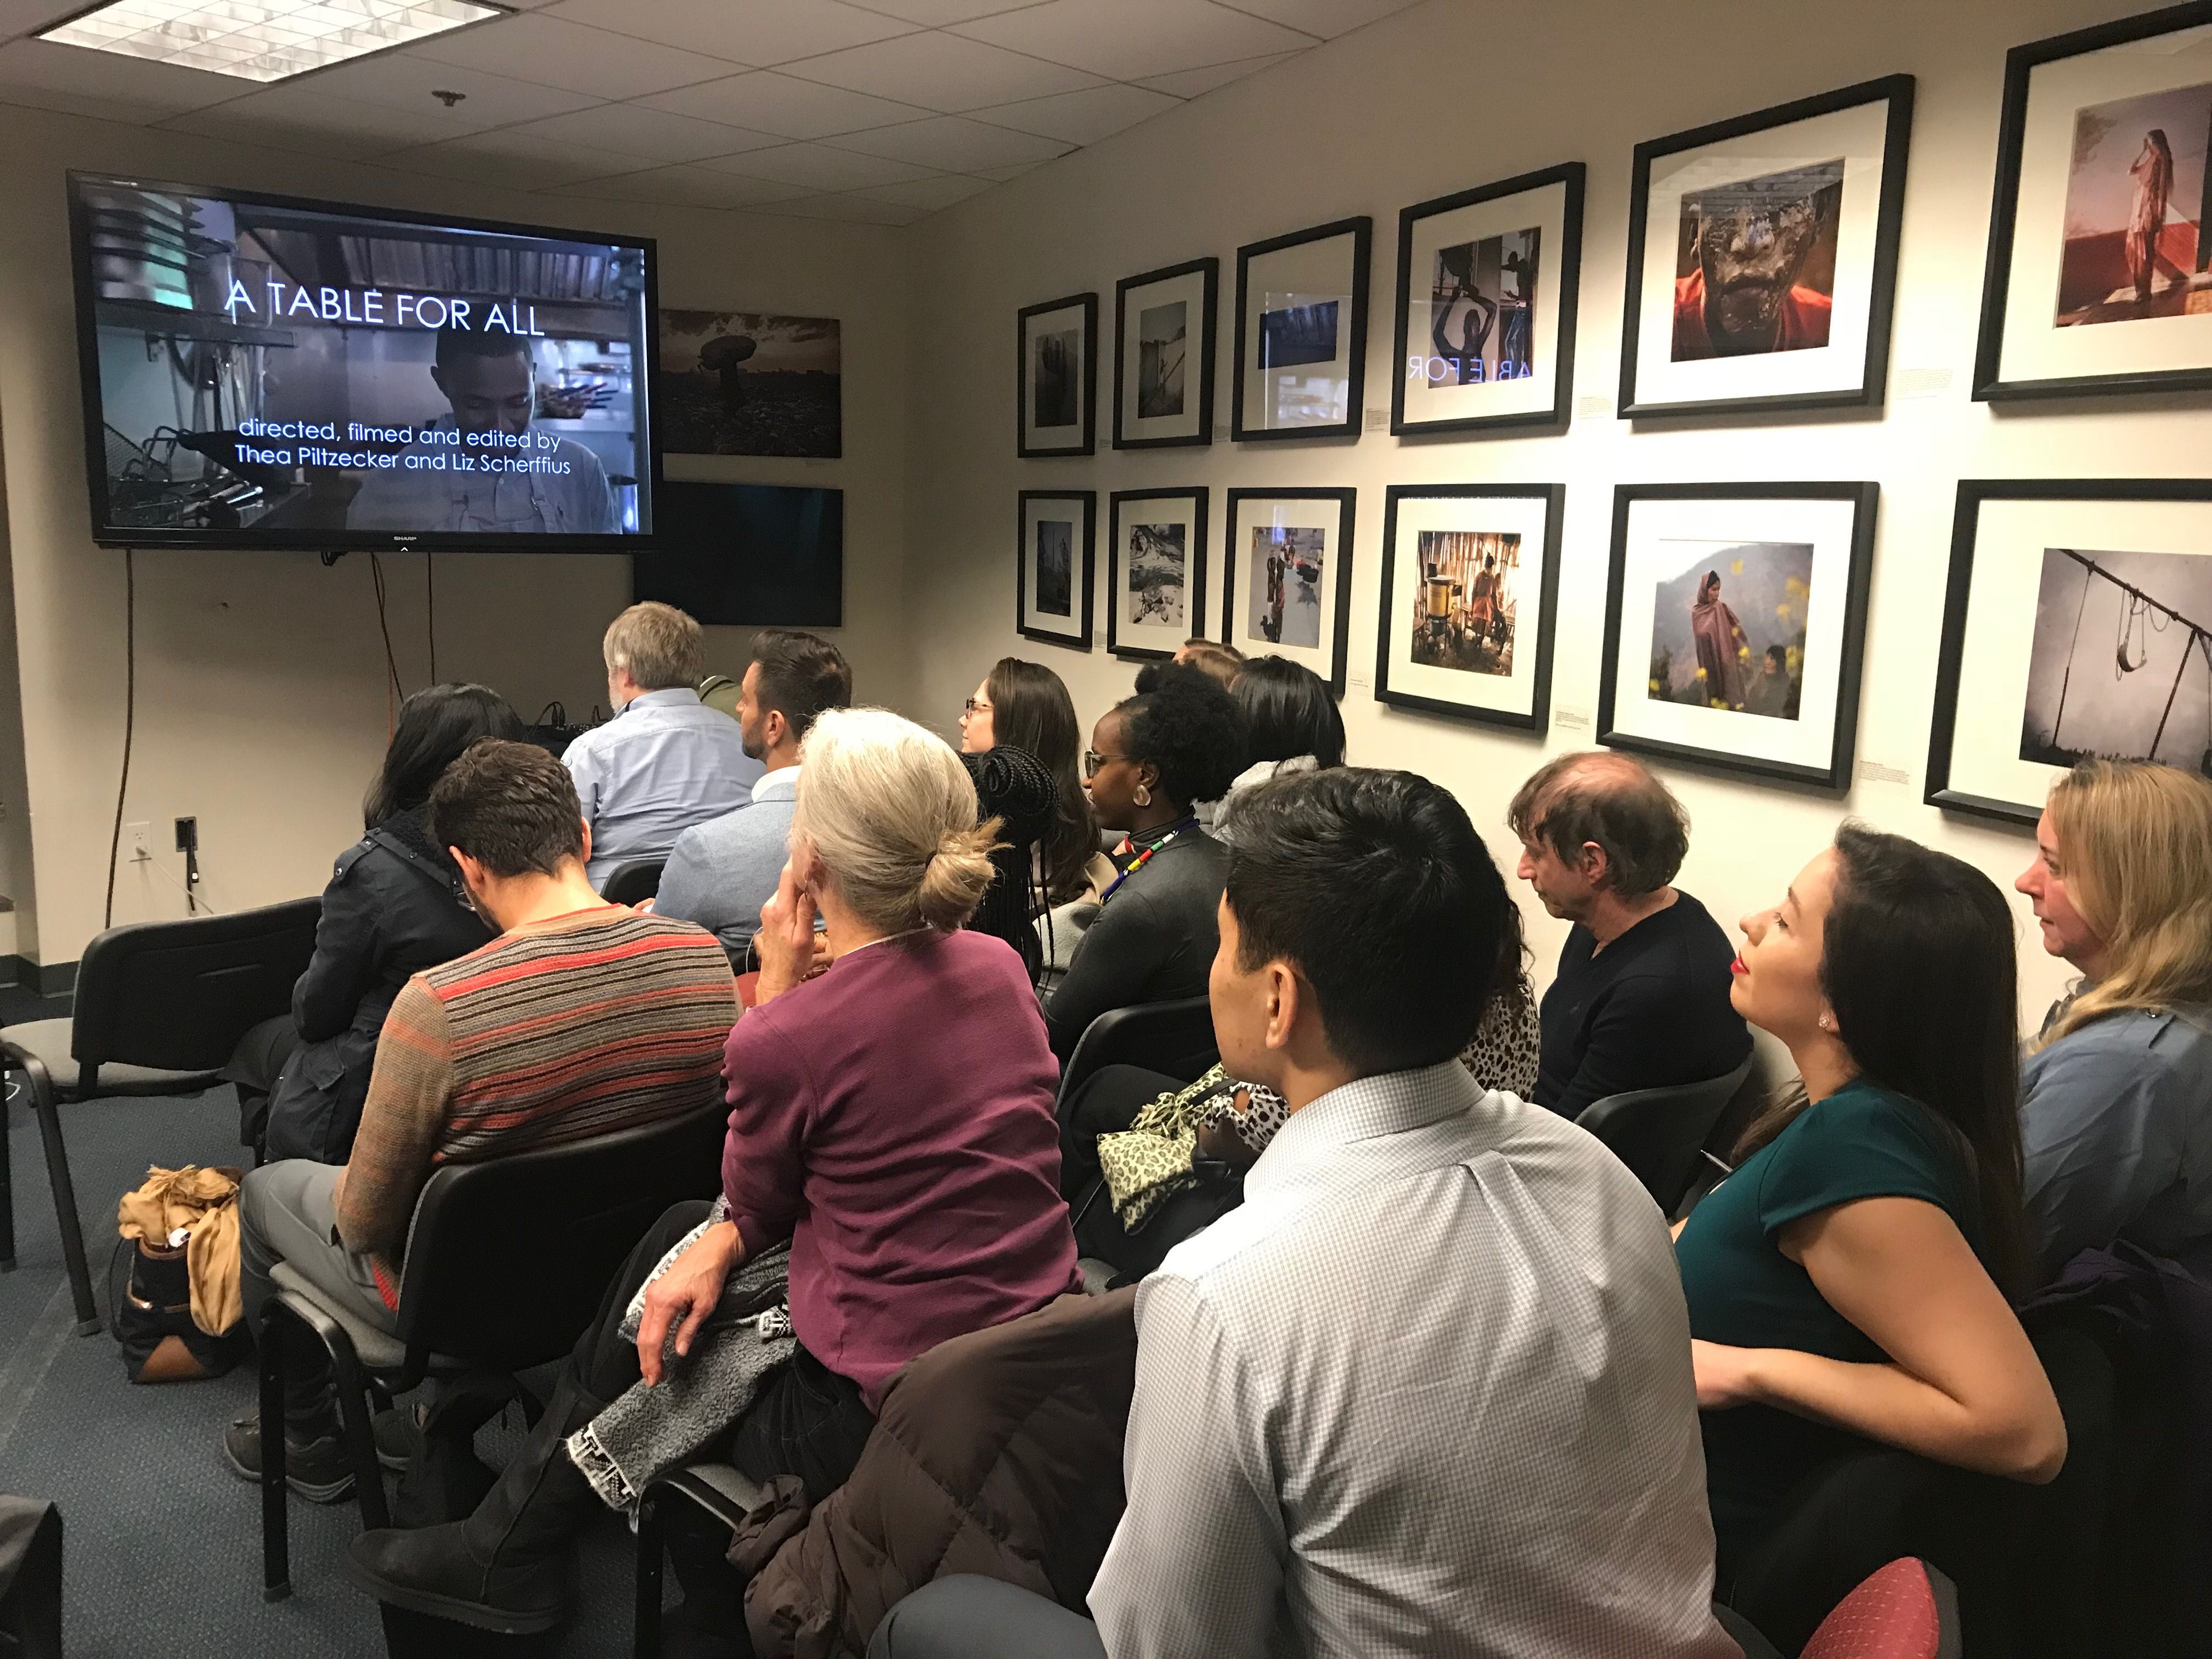 Audience at the Pulitzer Center's screening of A Table for All. Image by Elana King-Nakaoka. United States, 2019.